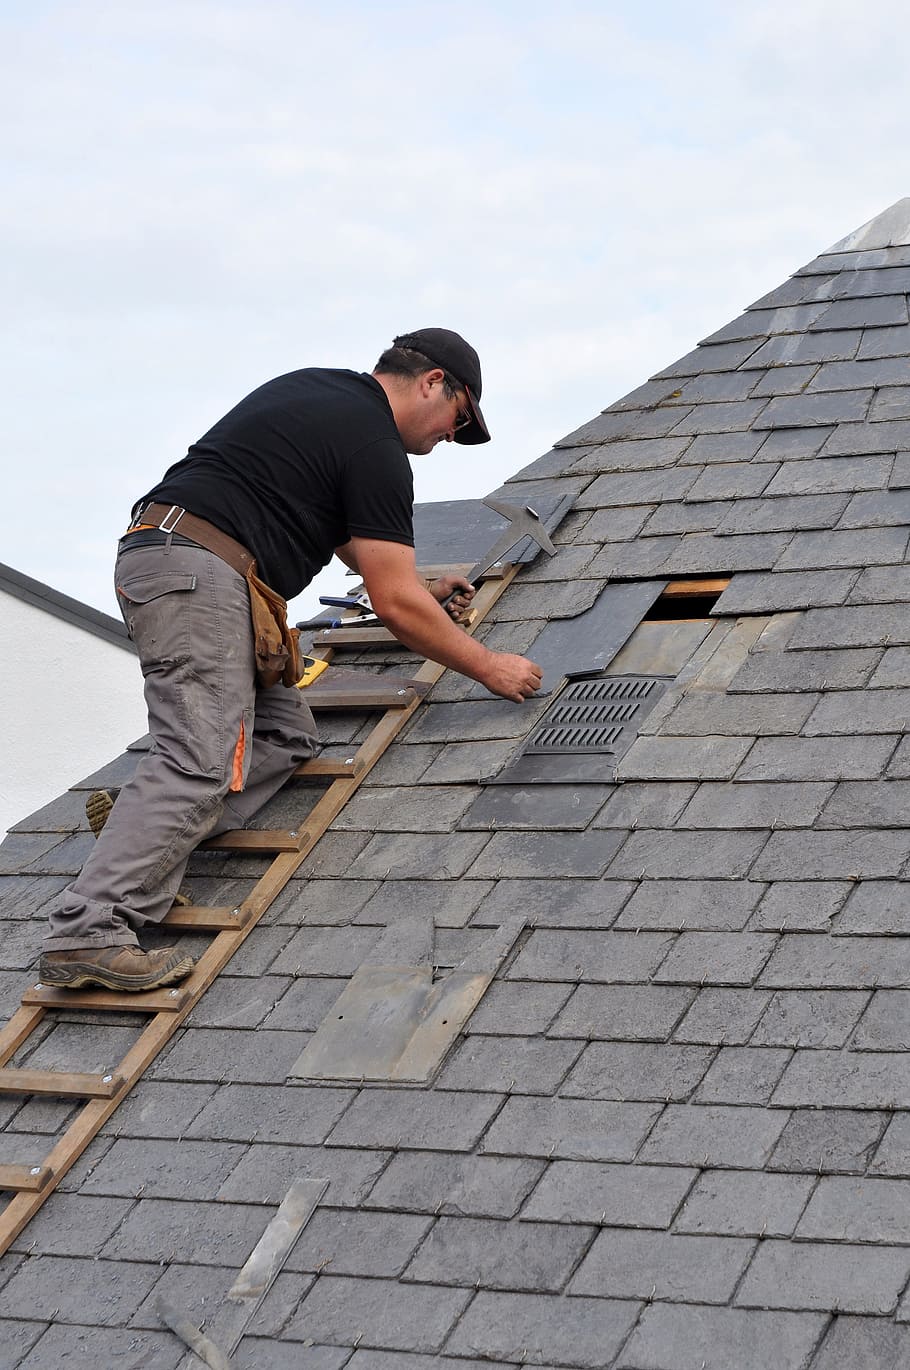 man on roof, roofer, coverage, artisan, slate, roof, roofing, manual work, business, real people